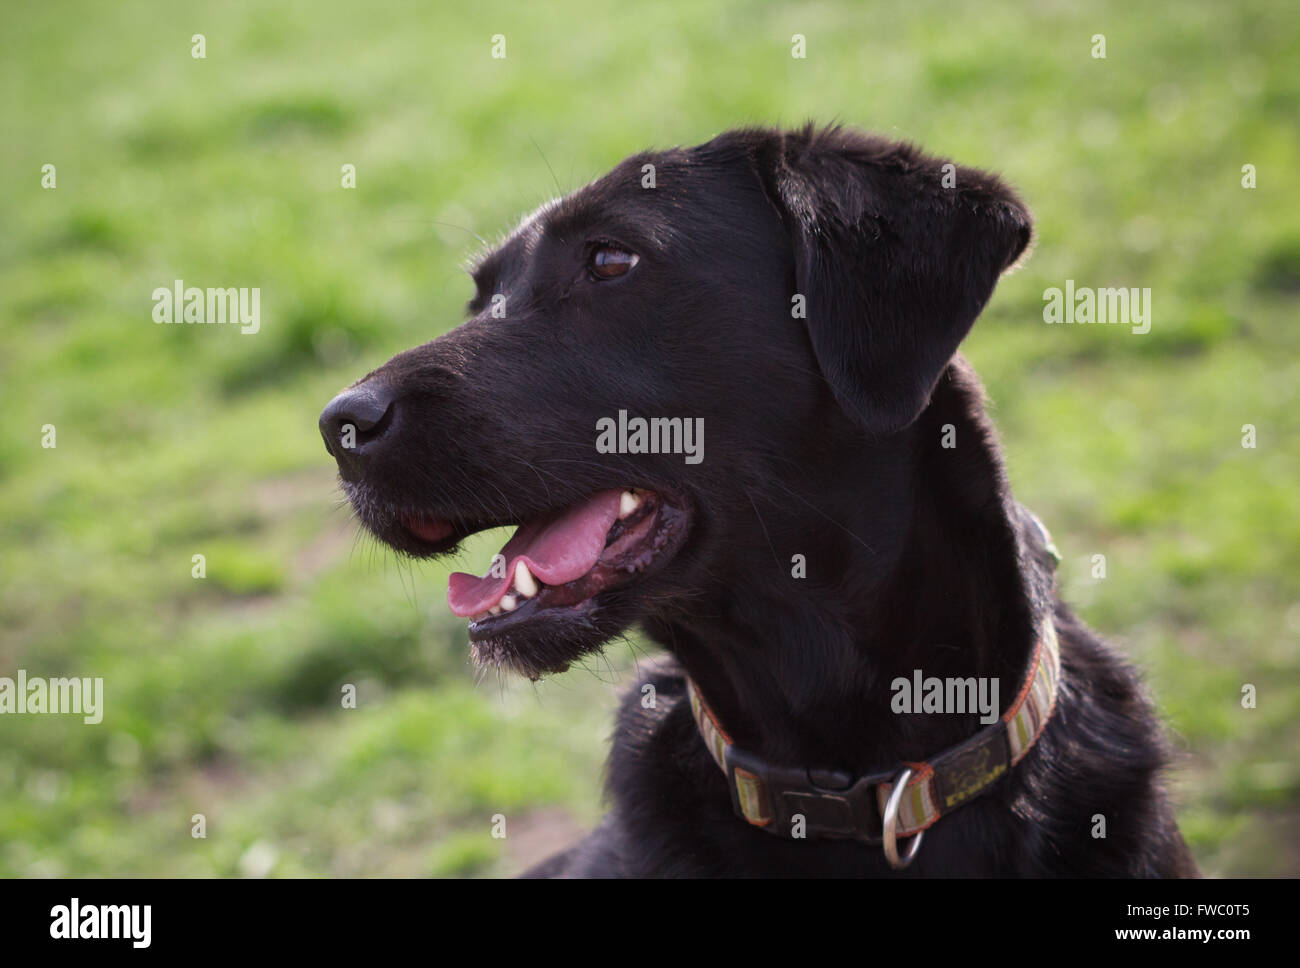 Dog portrait on green grass outdoors Stock Photo